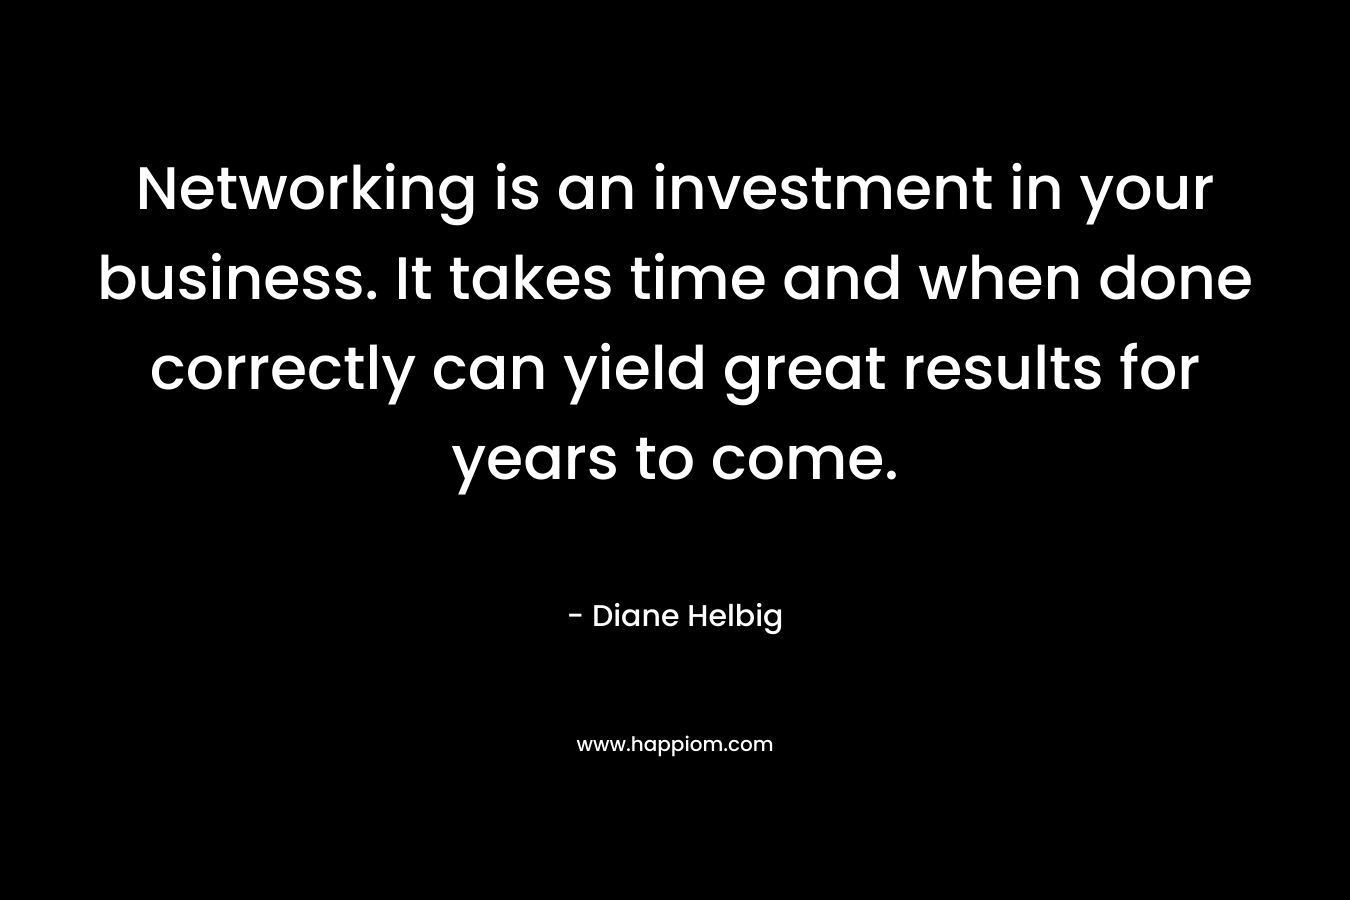 Networking is an investment in your business. It takes time and when done correctly can yield great results for years to come.